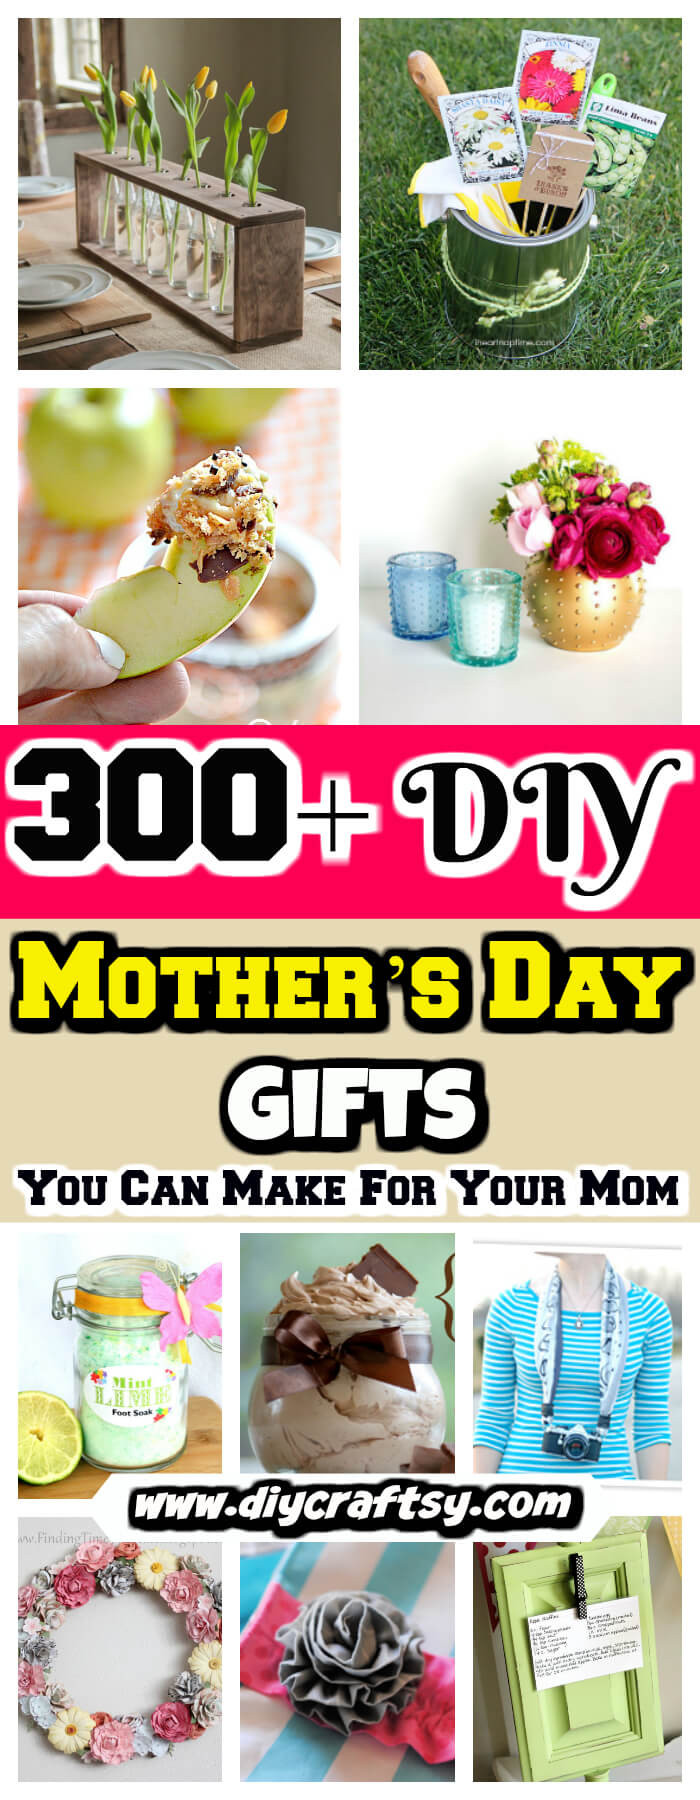 Mothers Day Gifts You Can Make
 300 DIY Mothers Day Gifts You Can Make For Your Mom DIY